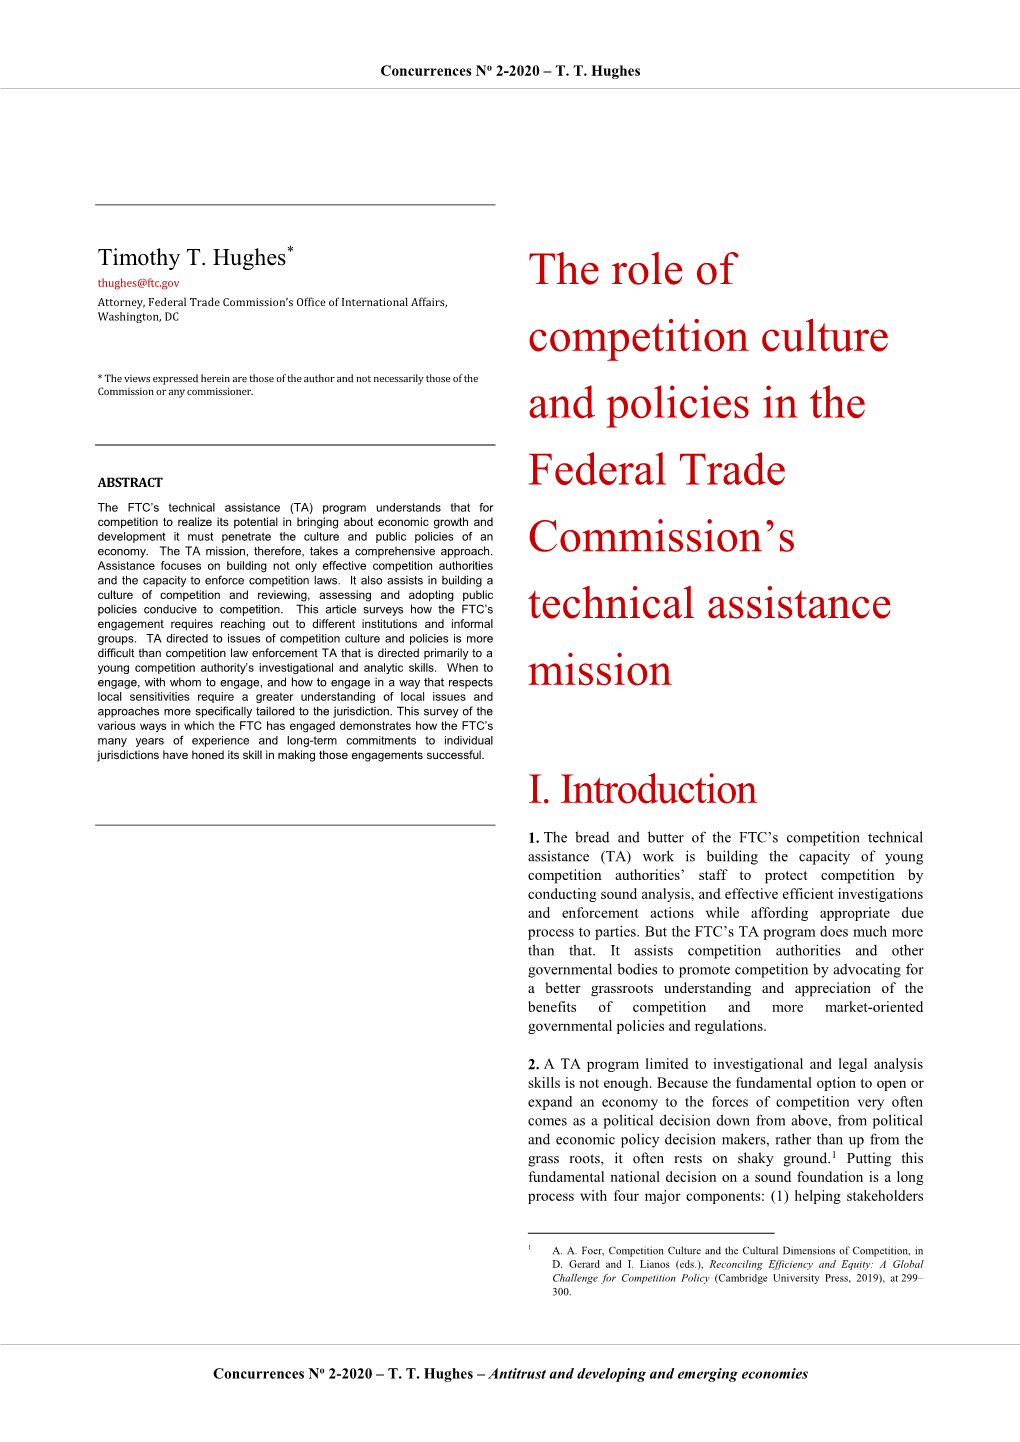 The Role of Competition Culture and Policies in the Federal Trade